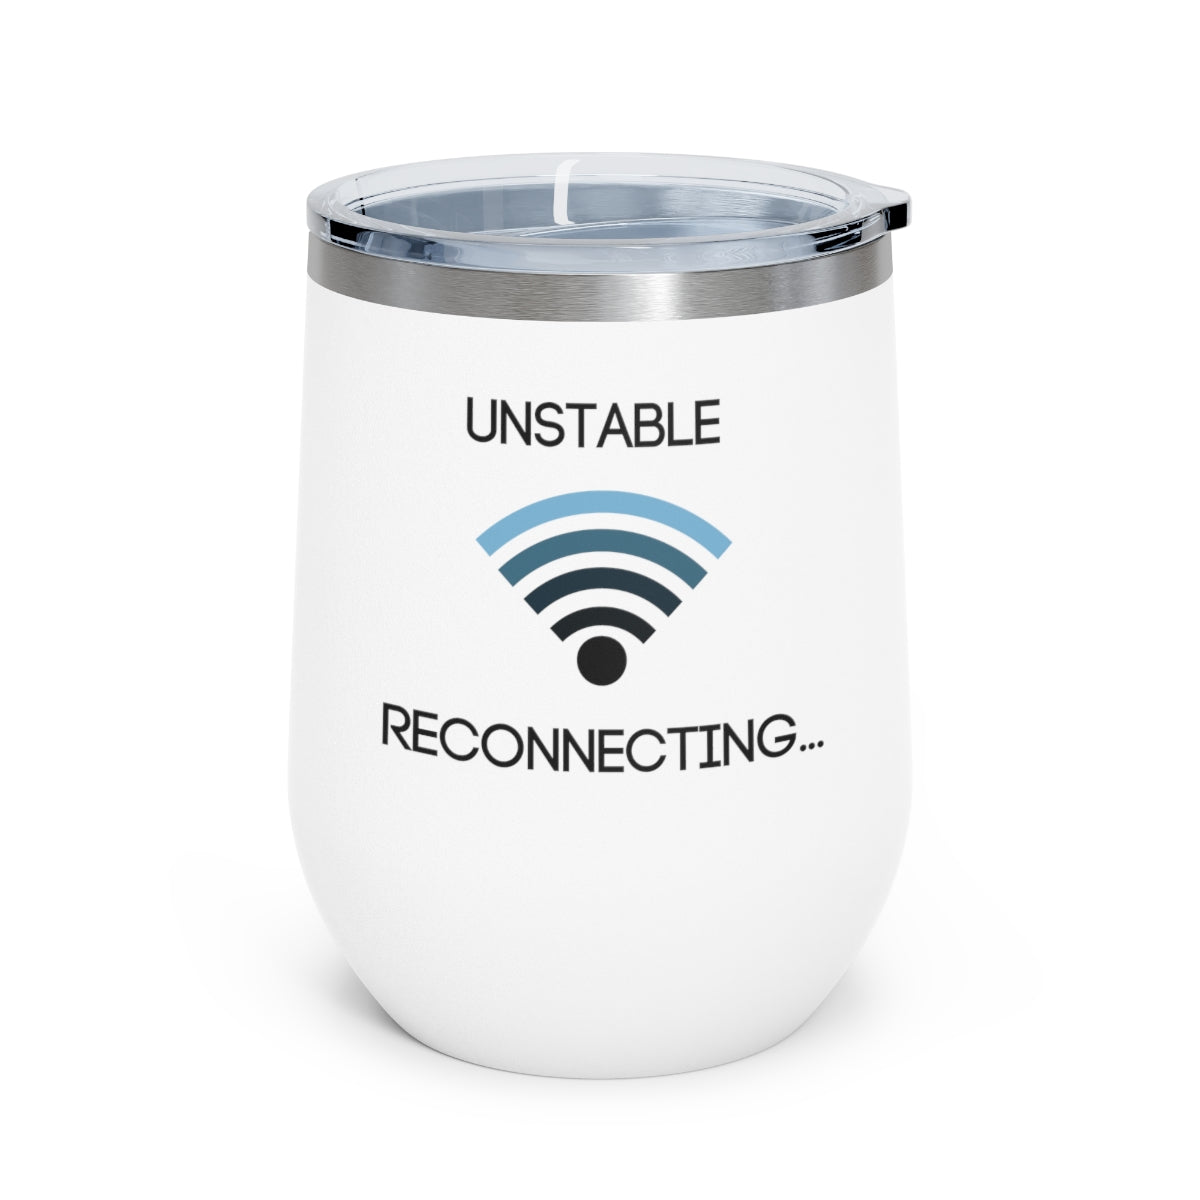 Unstable Reconnecting: Insulated Wine Tumbler